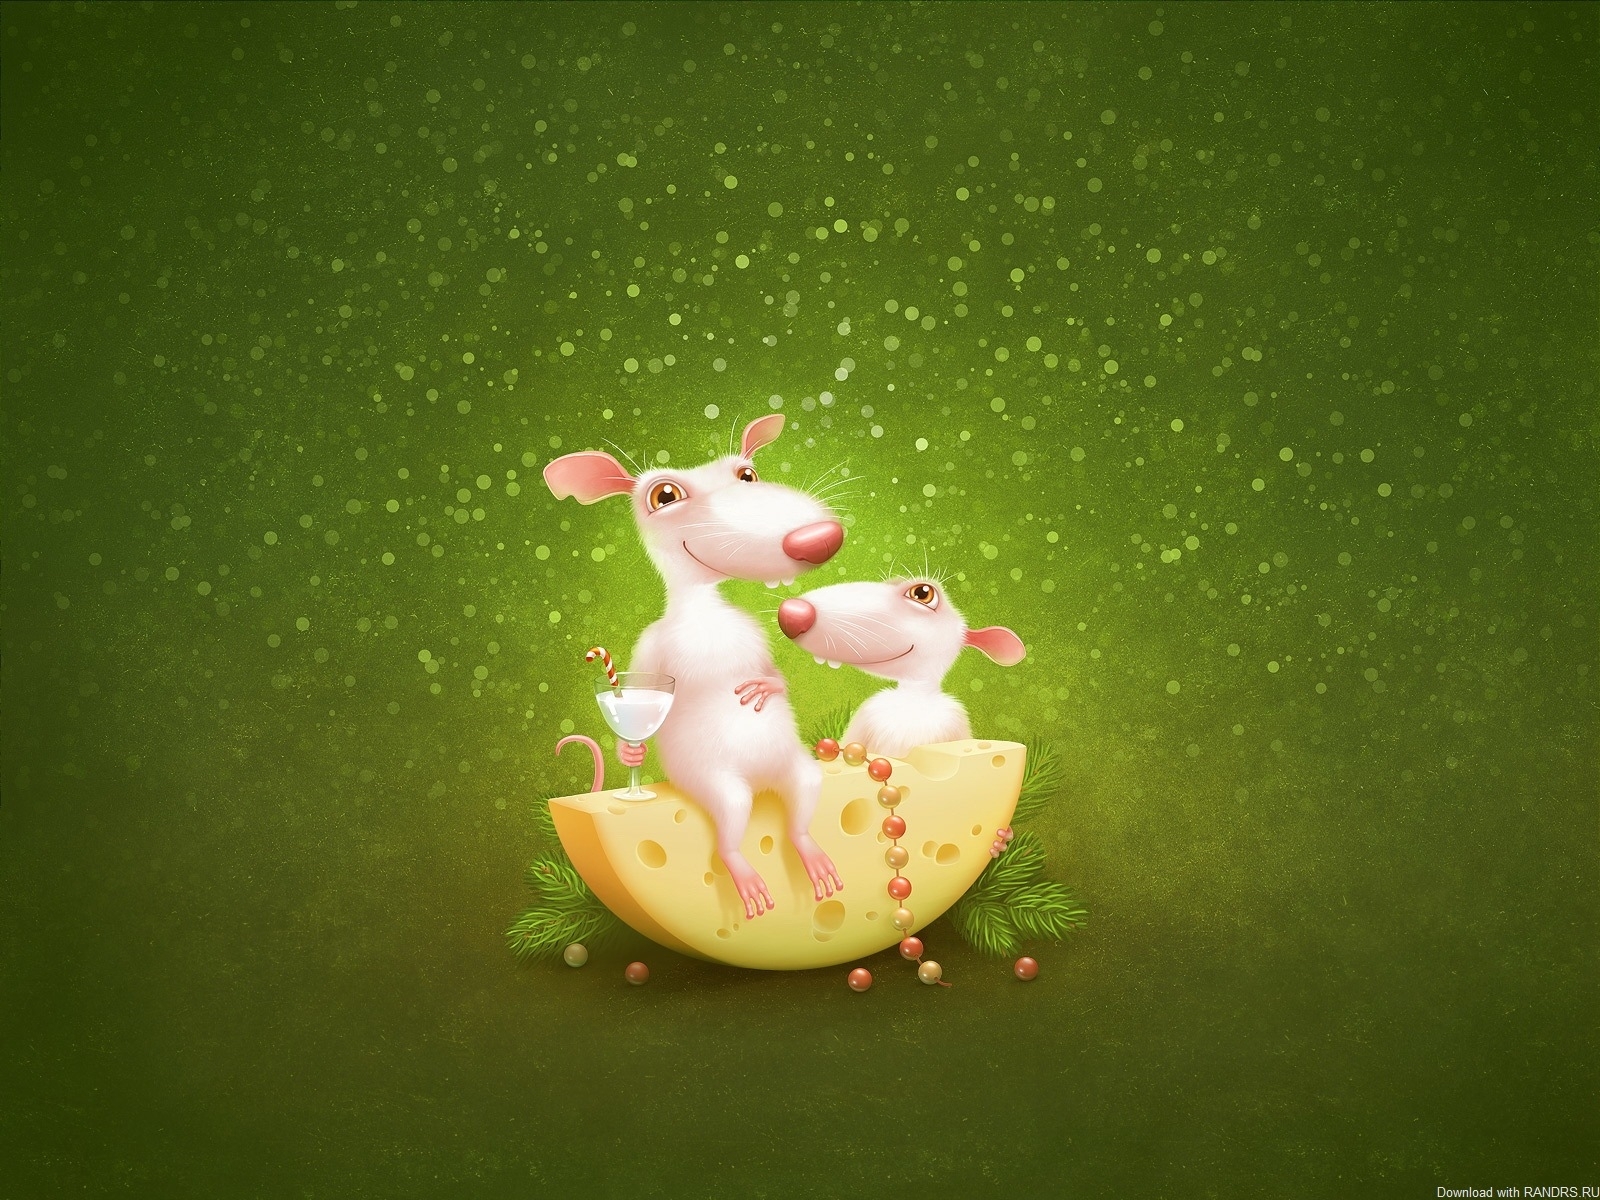 mice, pictures, green download HD wallpaper